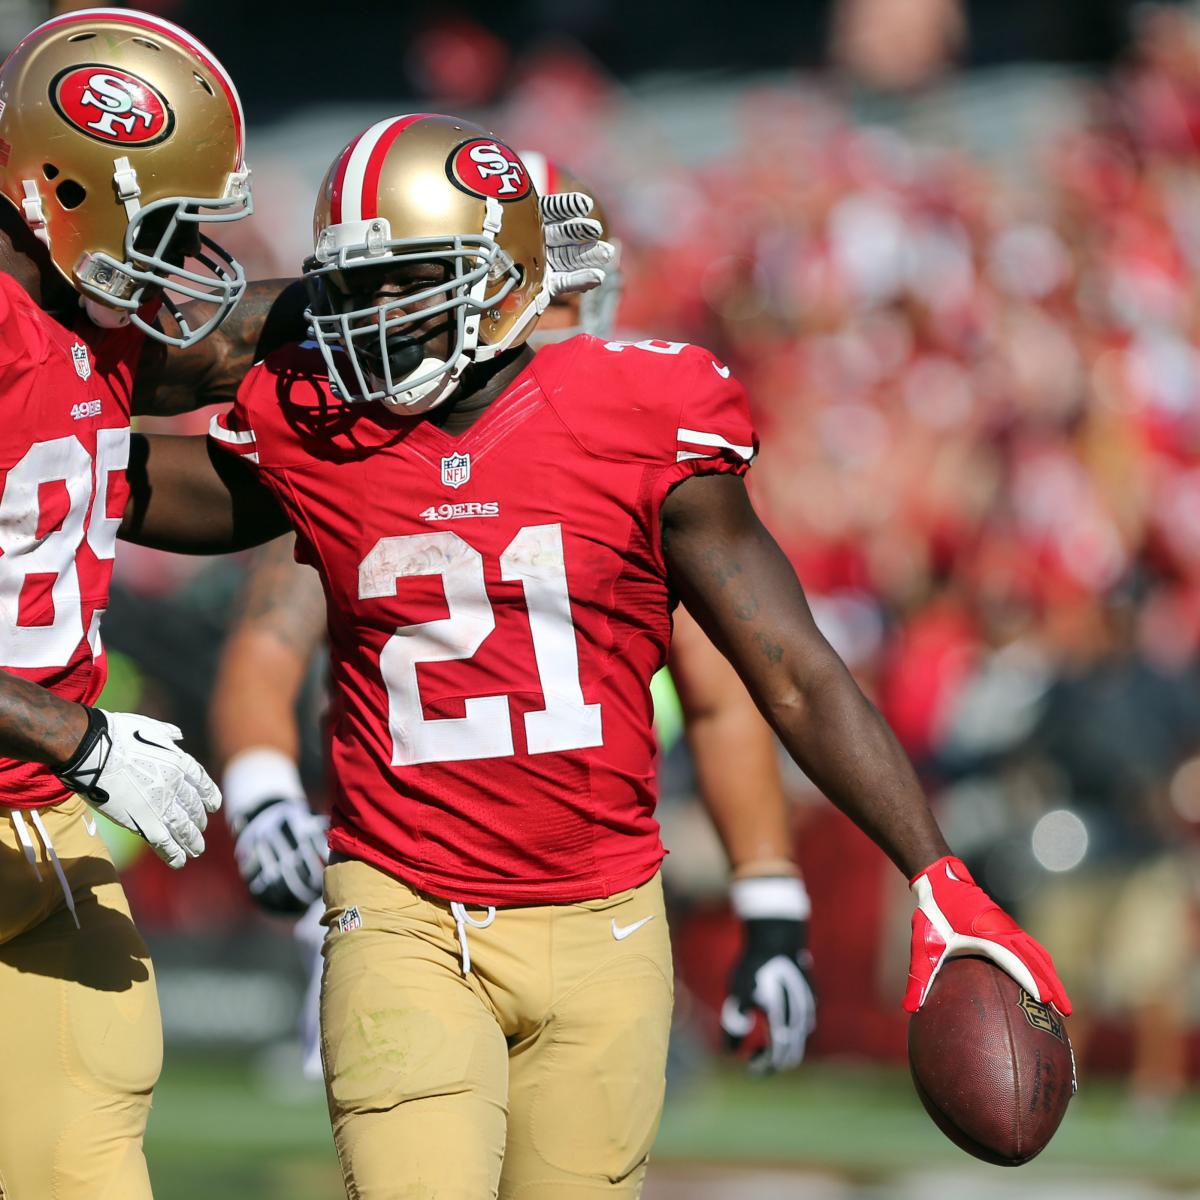 Packers vs. 49ers: Score, Grades and Analysis | Bleacher Report | Latest News, Videos ...